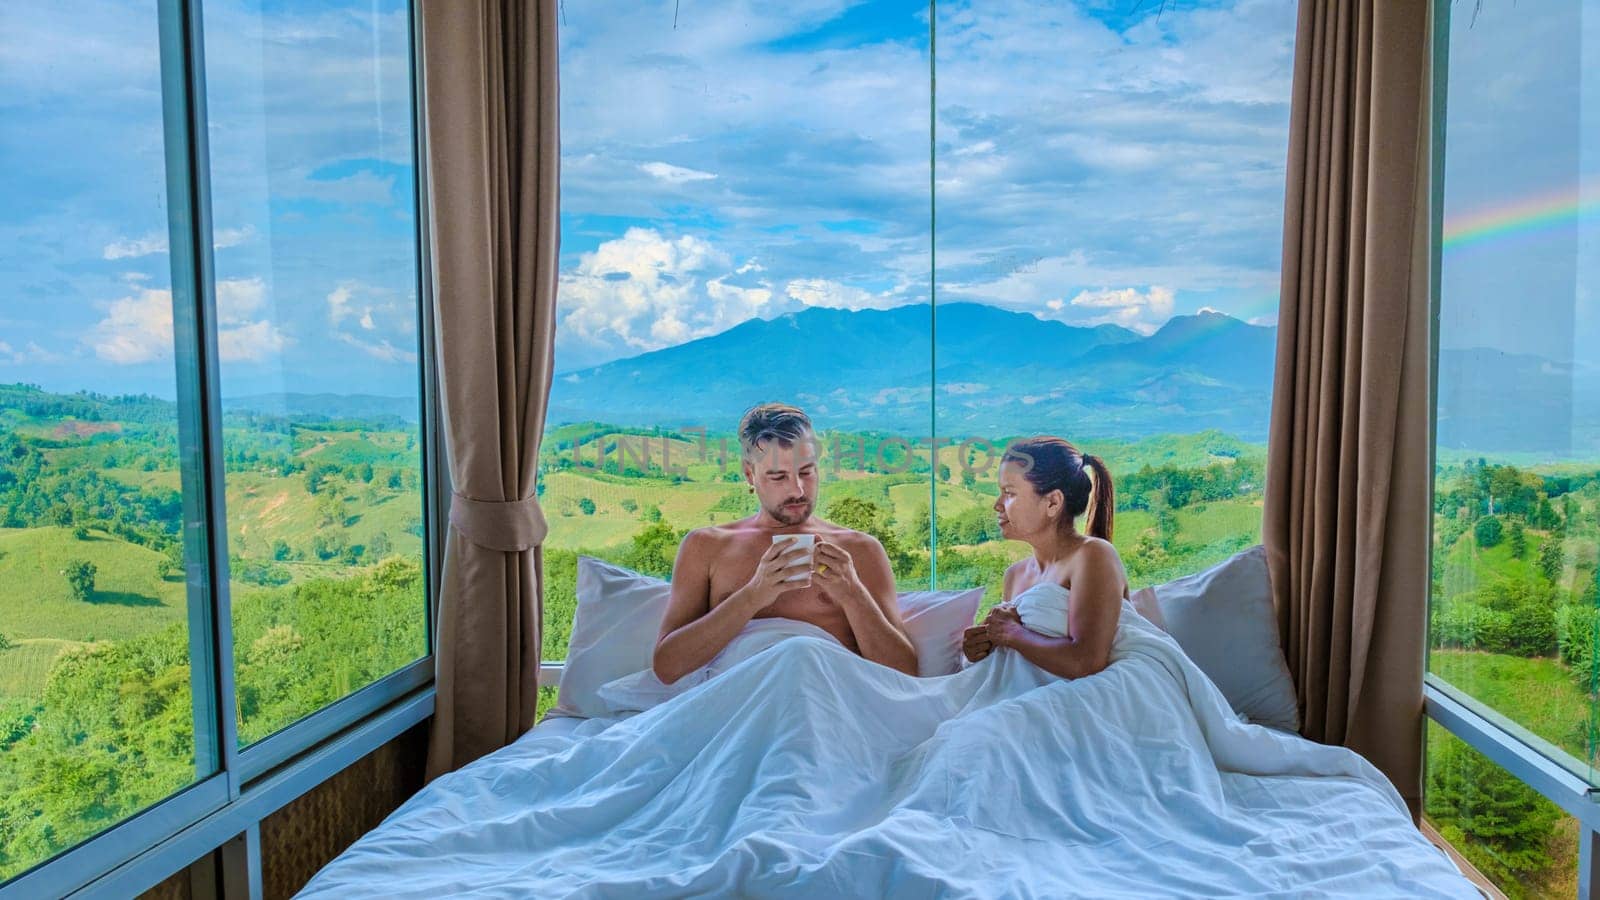 a couple of men and women laying in bed with open widows looking out over the mountains of Thailand, men and woman in bedroom with large open glass windows looking out over the green landscape of Nan